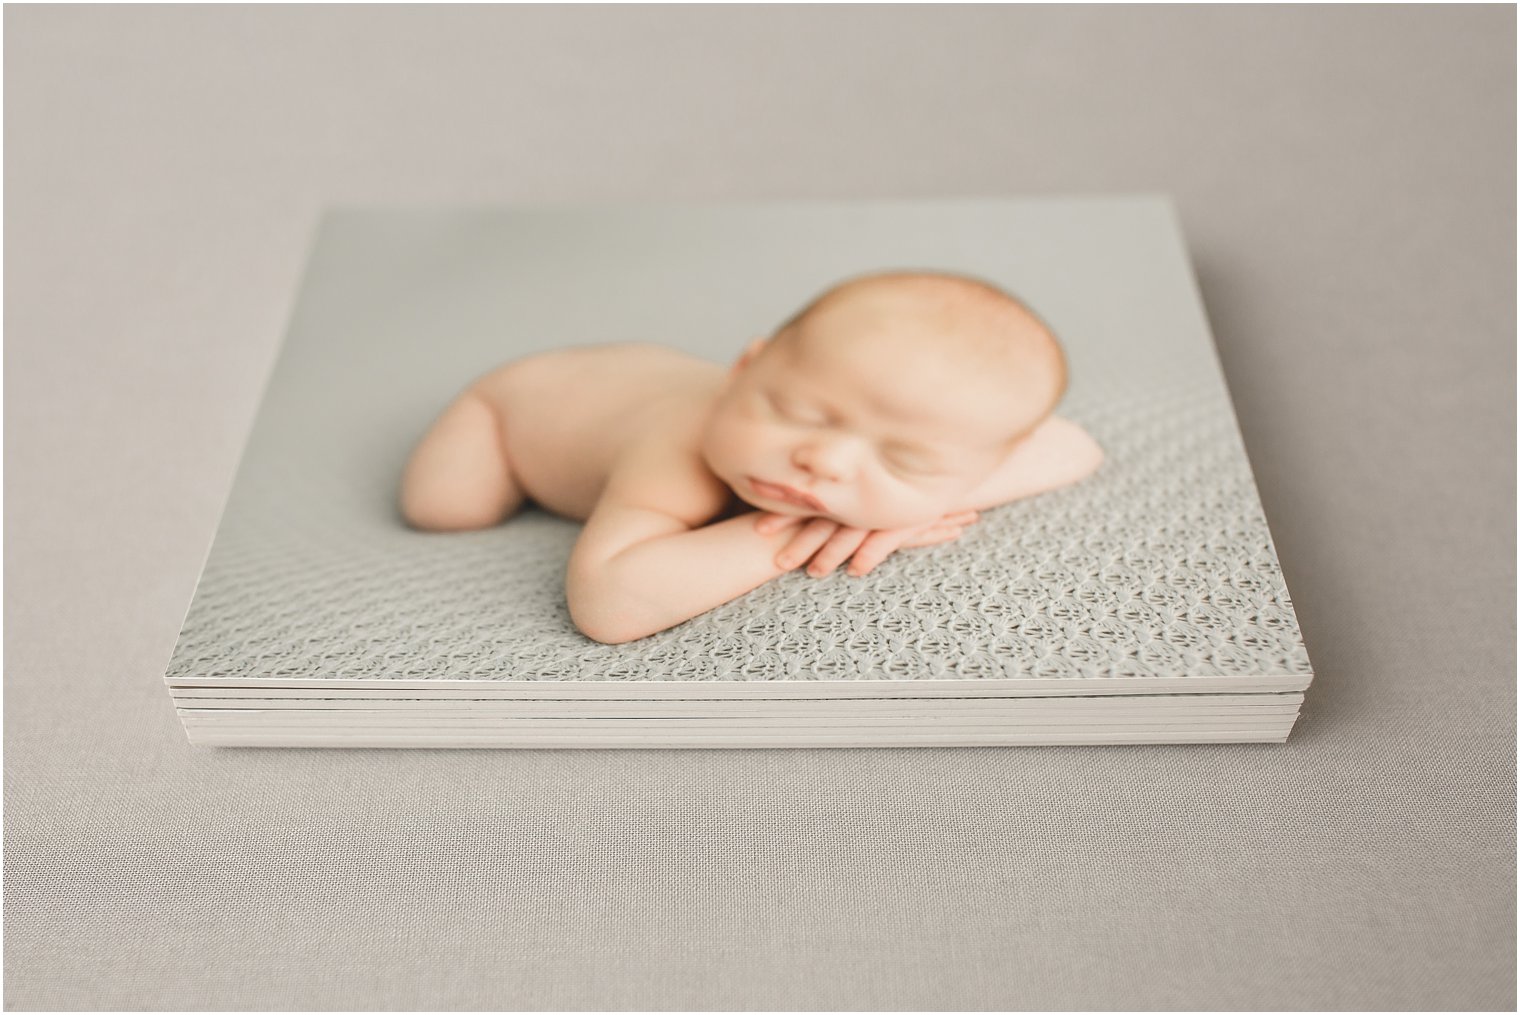 Displaying Newborn Photos in Your Home | Mounted Prints